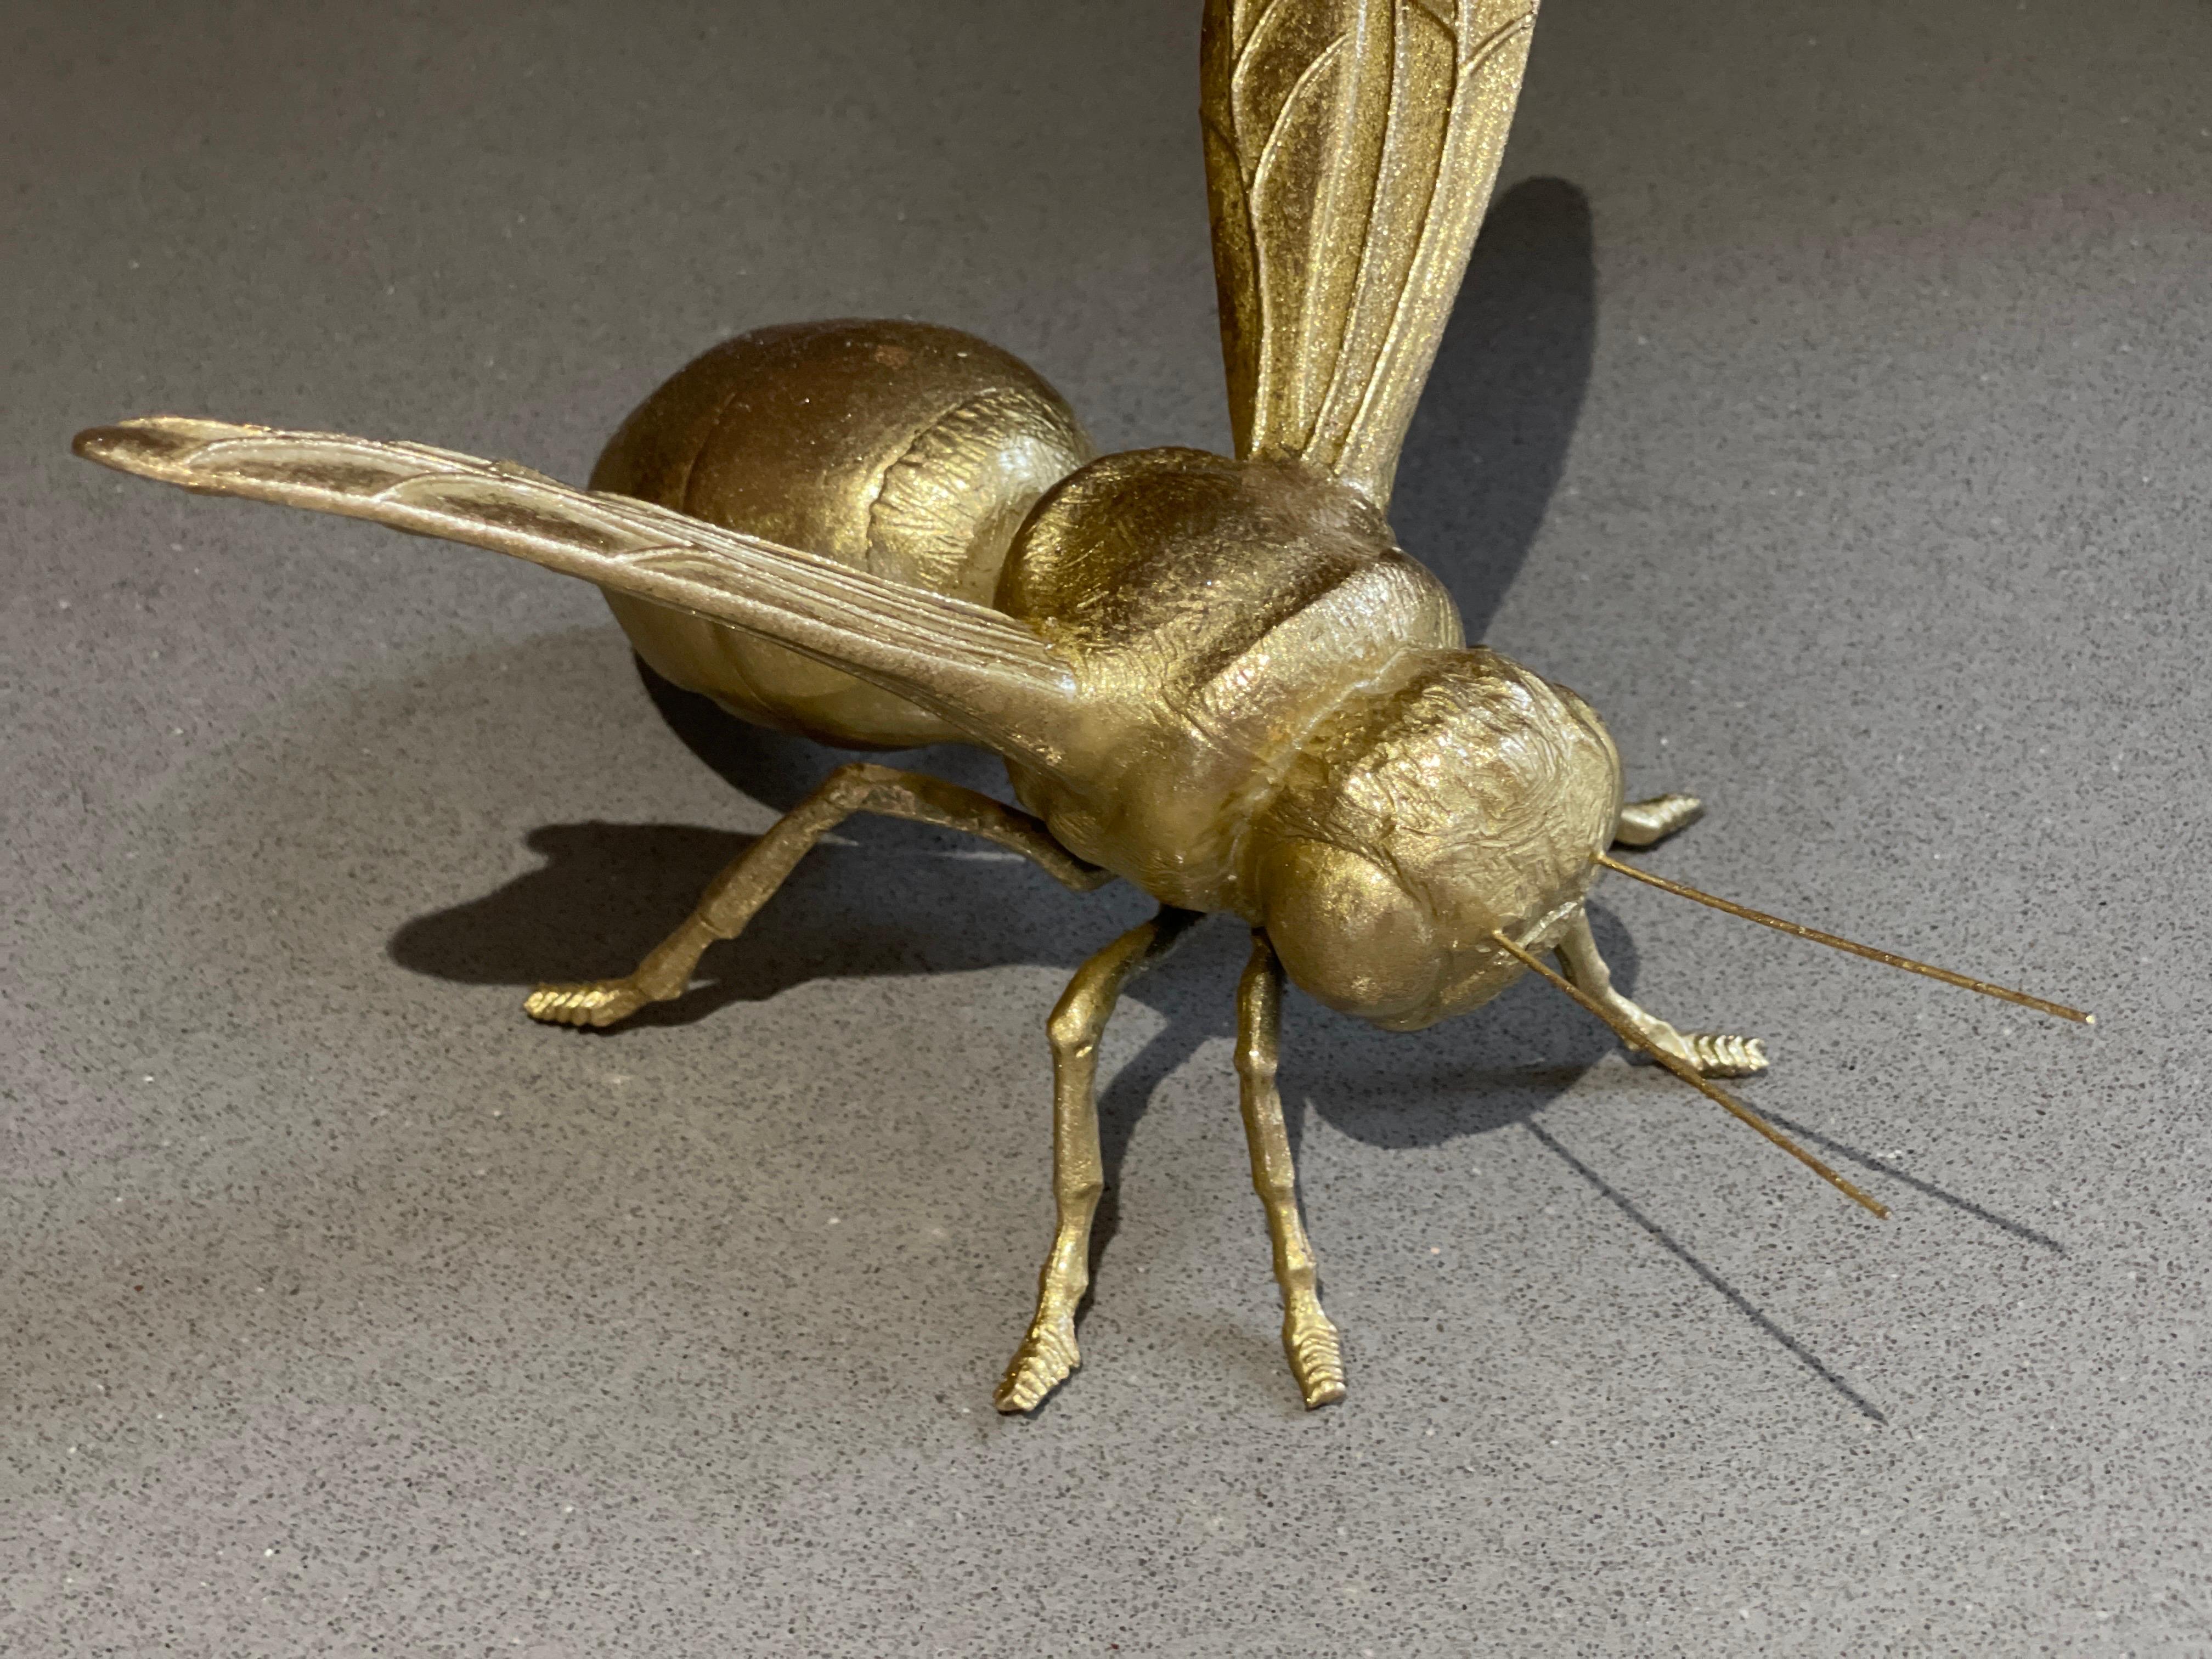 A beautiful vintage gold bee ornament for your room. An impressive size, this gold bee is a beautiful statement piece for a shelf or sideboard!
29 x 15 x 13cm 

